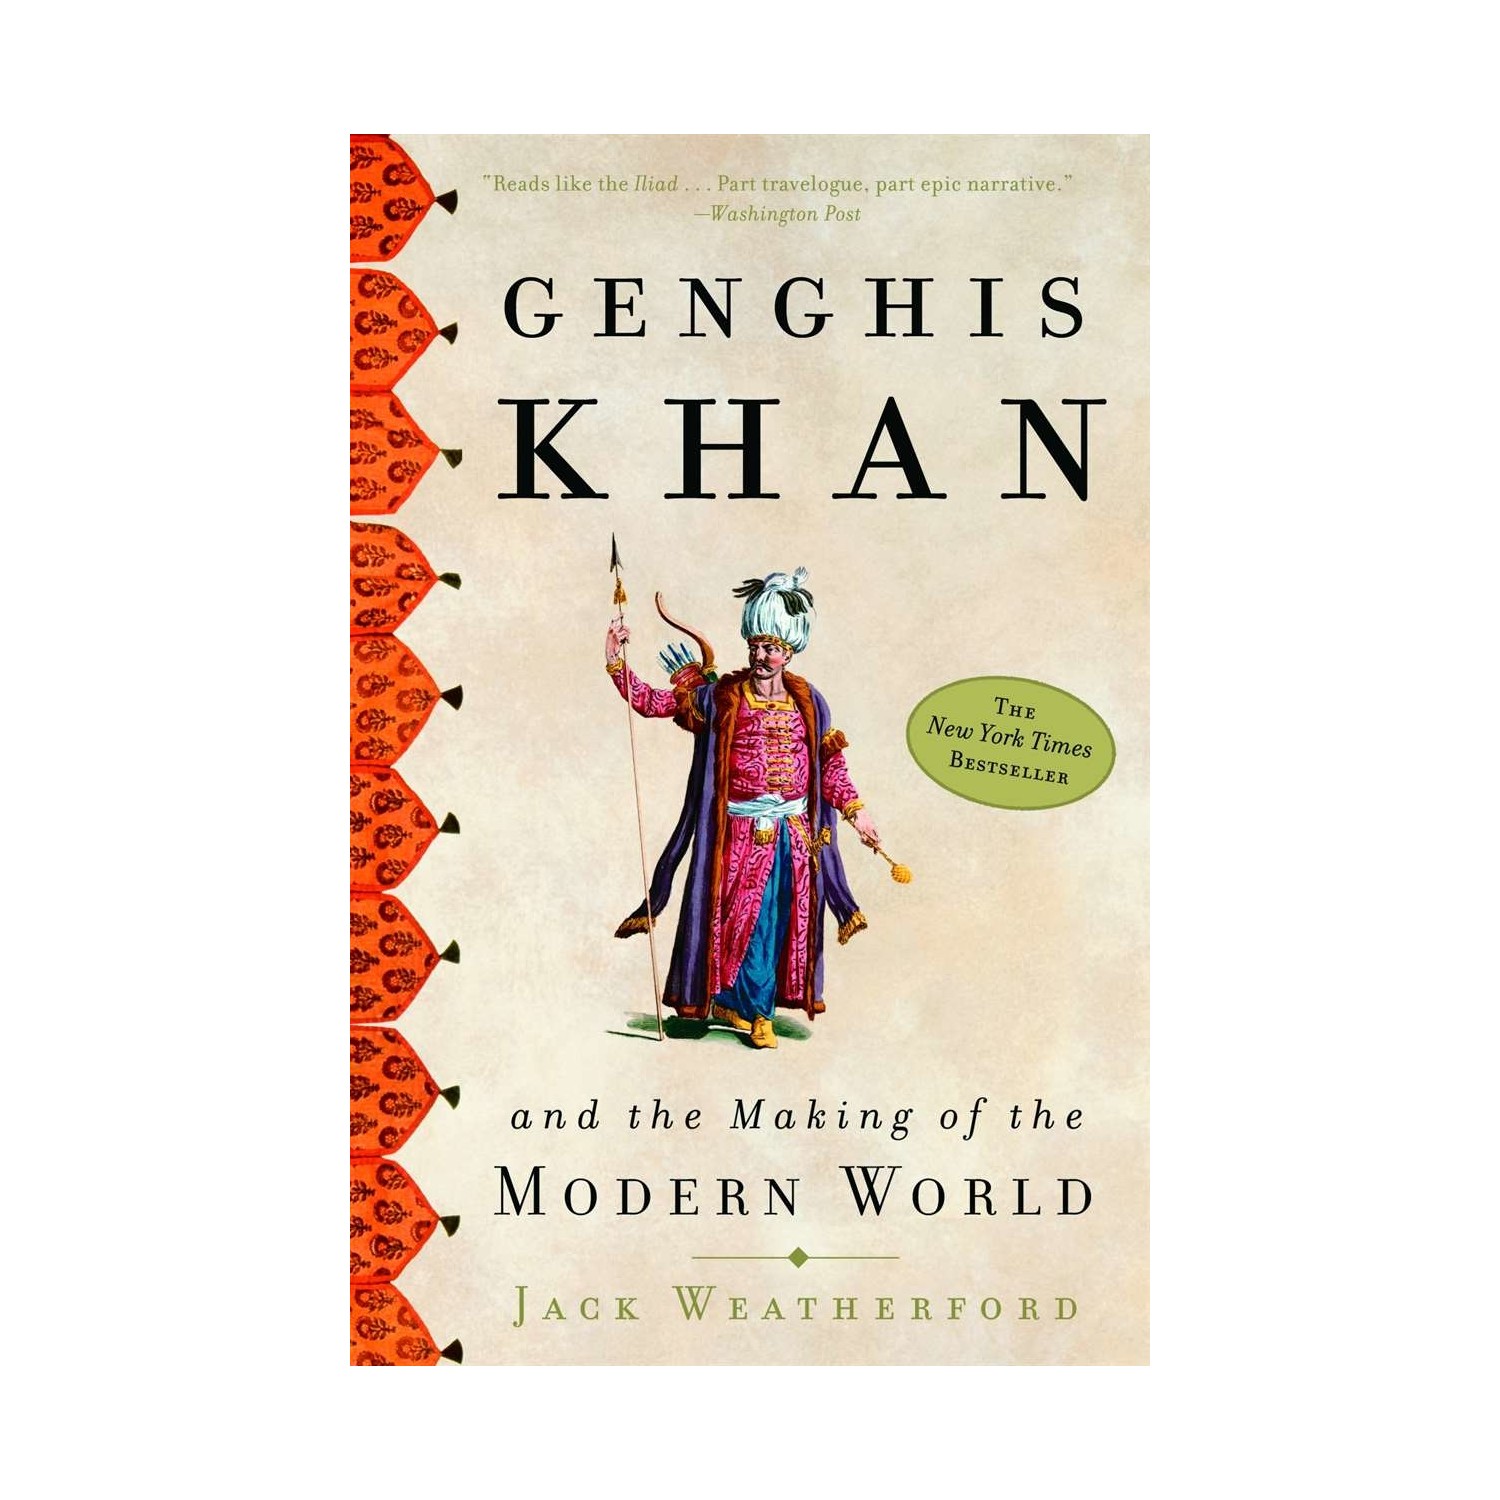 genghis khan and the making of the modern world book